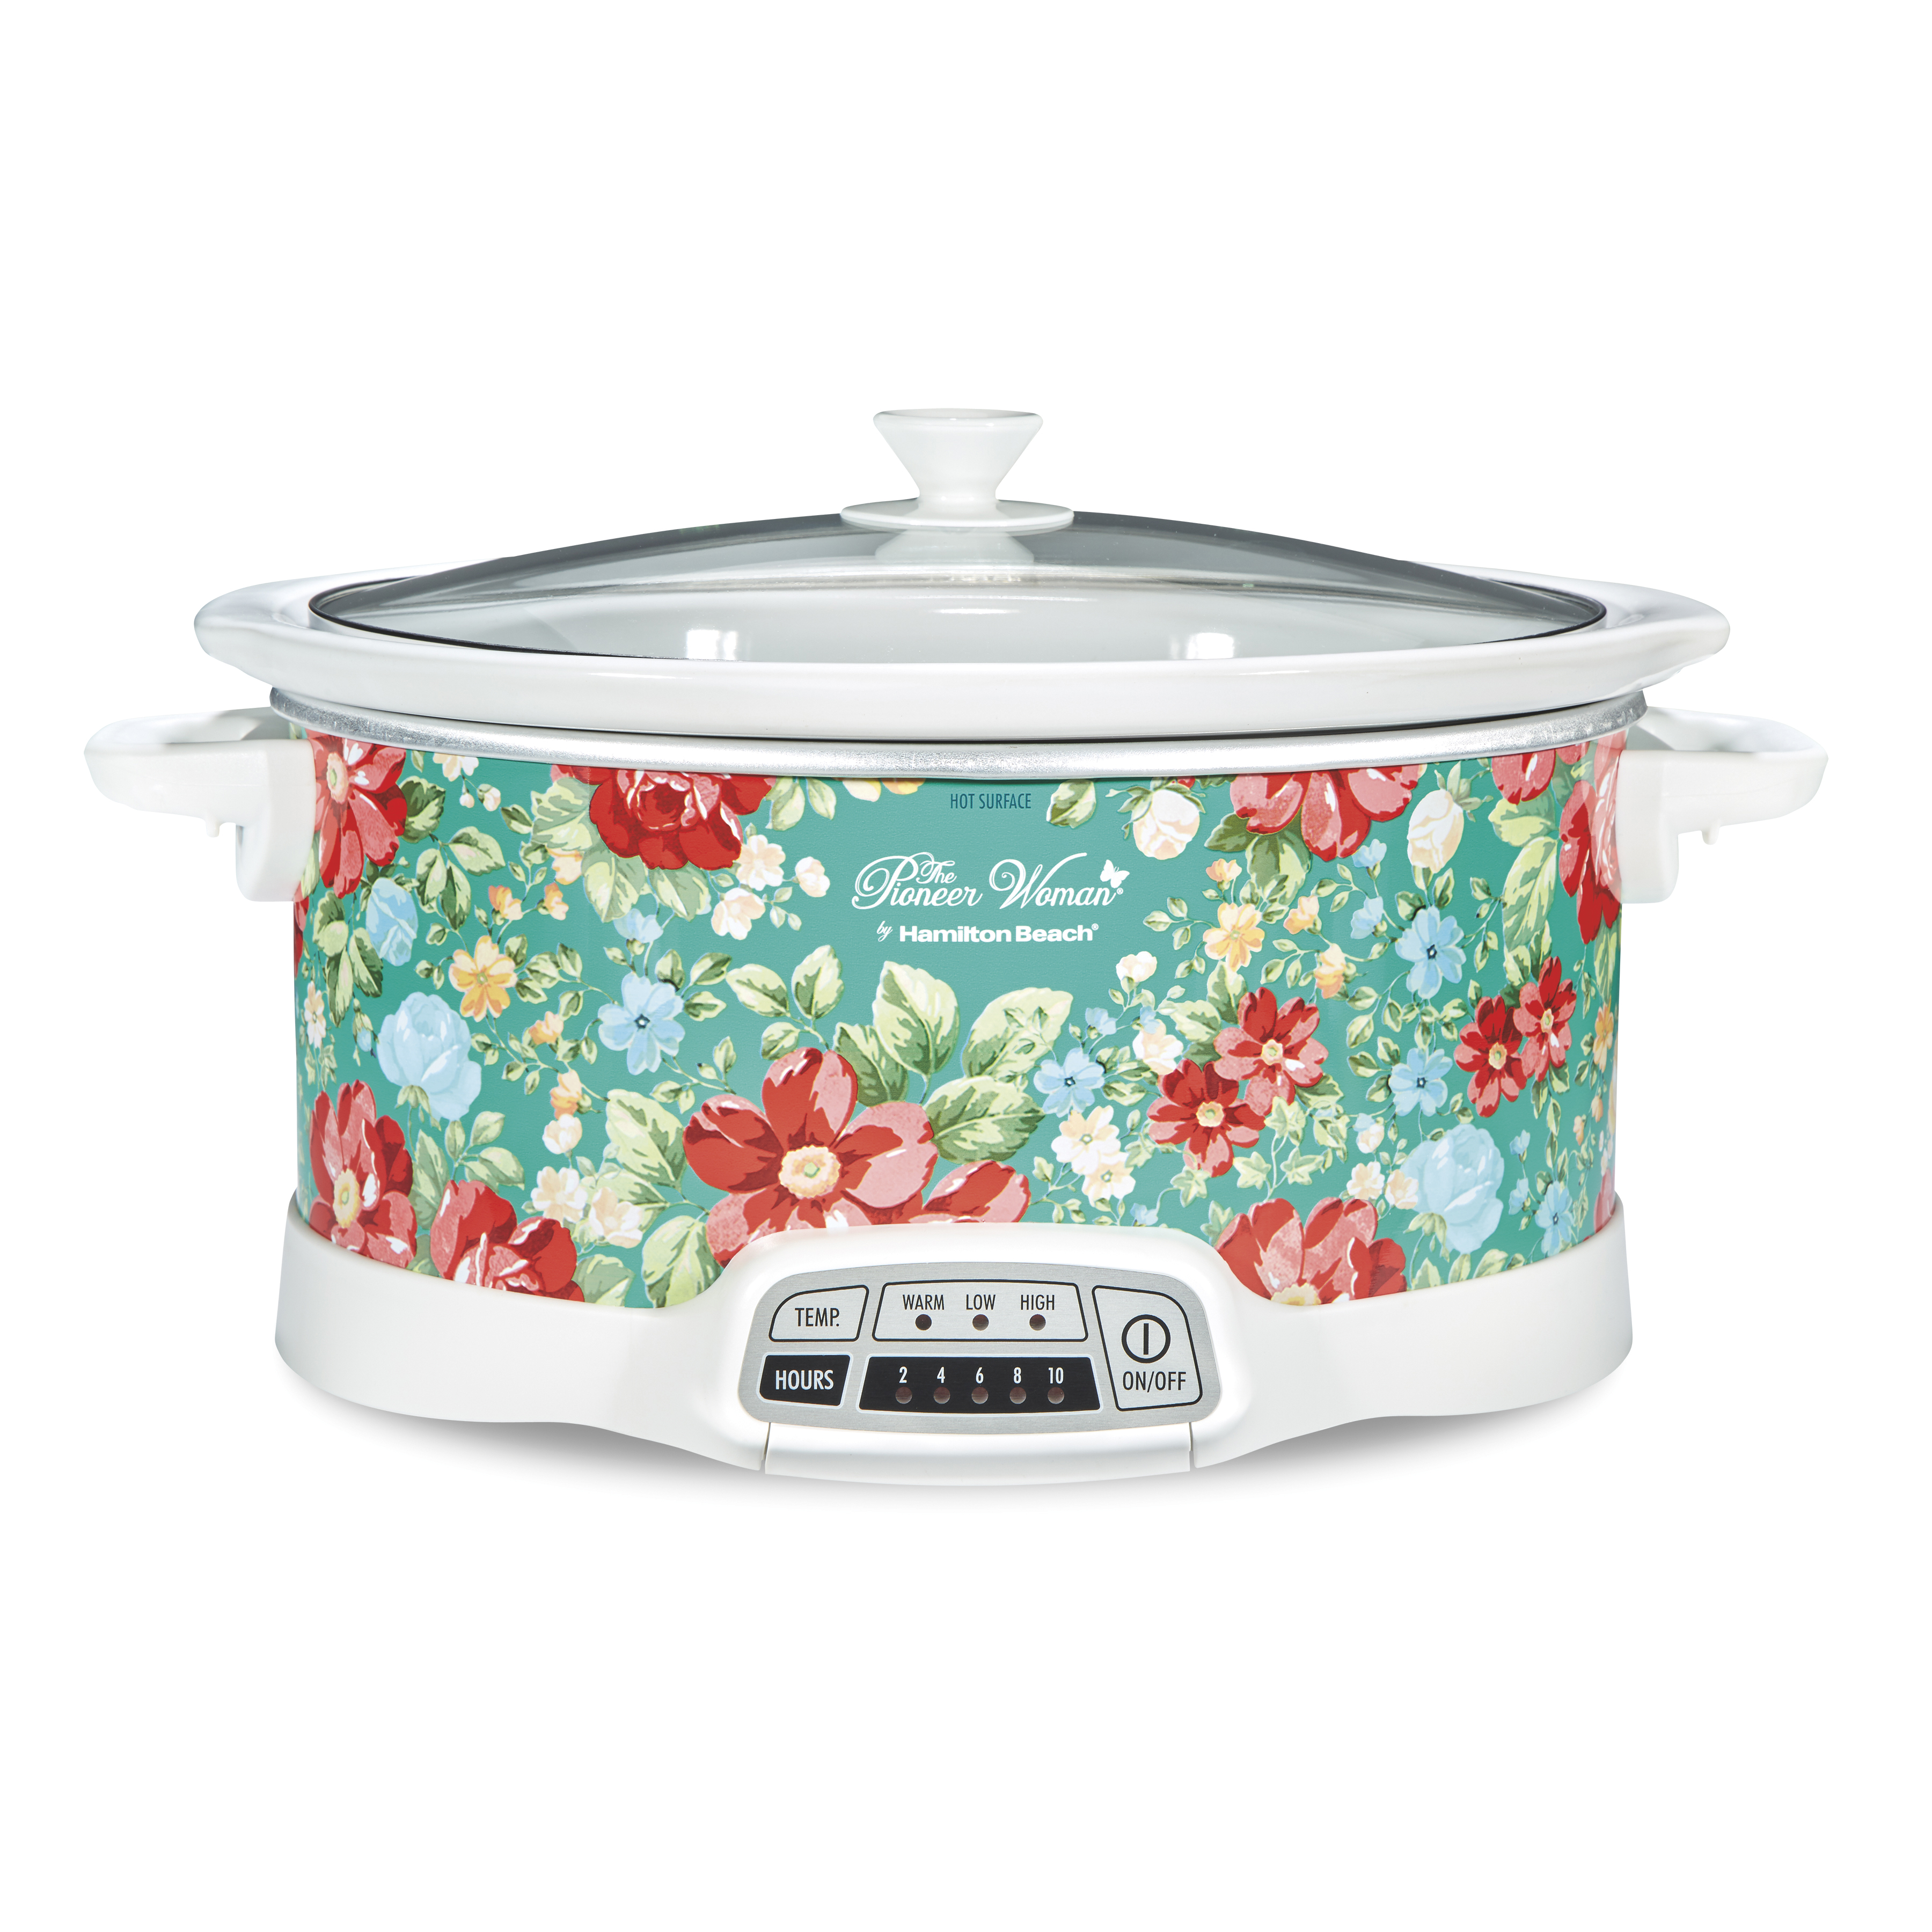 The Pioneer Woman Programmable Slow Cooker, 7 Quart Capacity, Removable Crock, Vintage Floral, 33479 - image 3 of 3